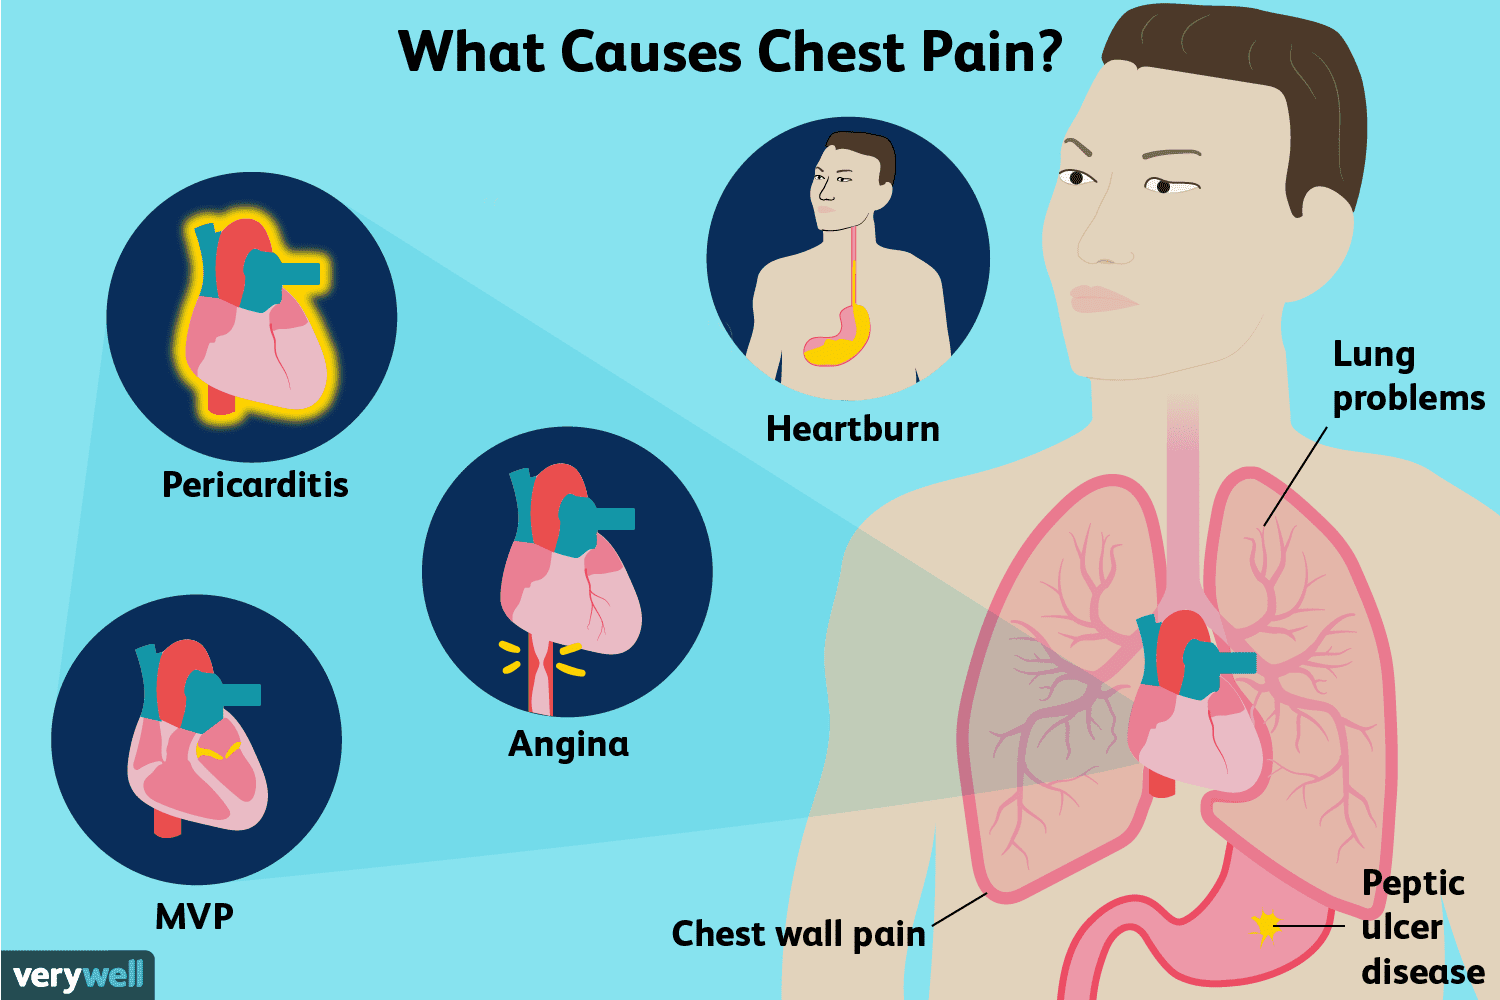 How Do You Tell If Chest Pain Is a Serious Emergency?